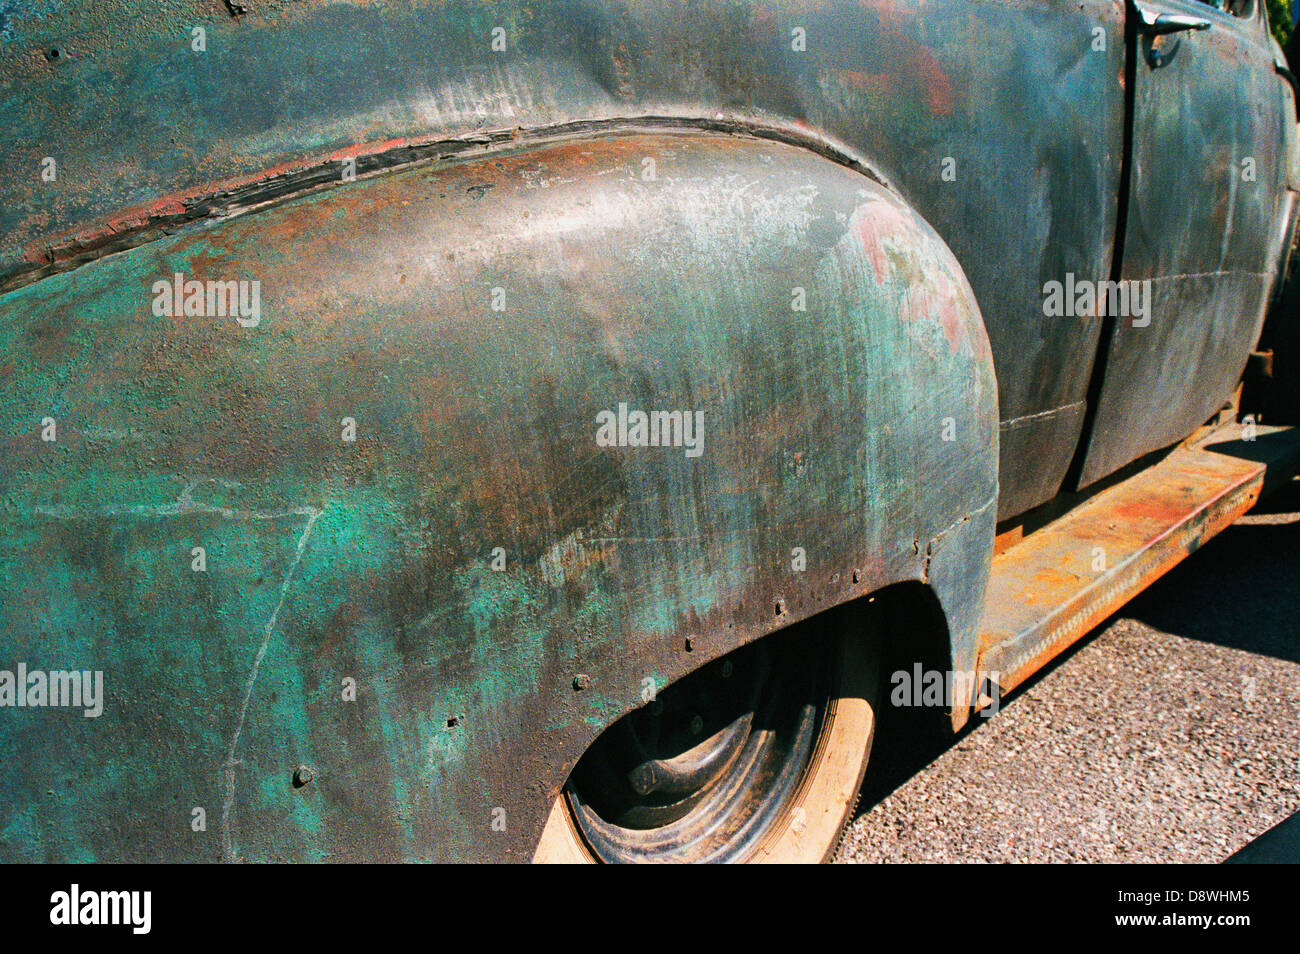 Mudguard of a old vintage car, close-up Stock Photo